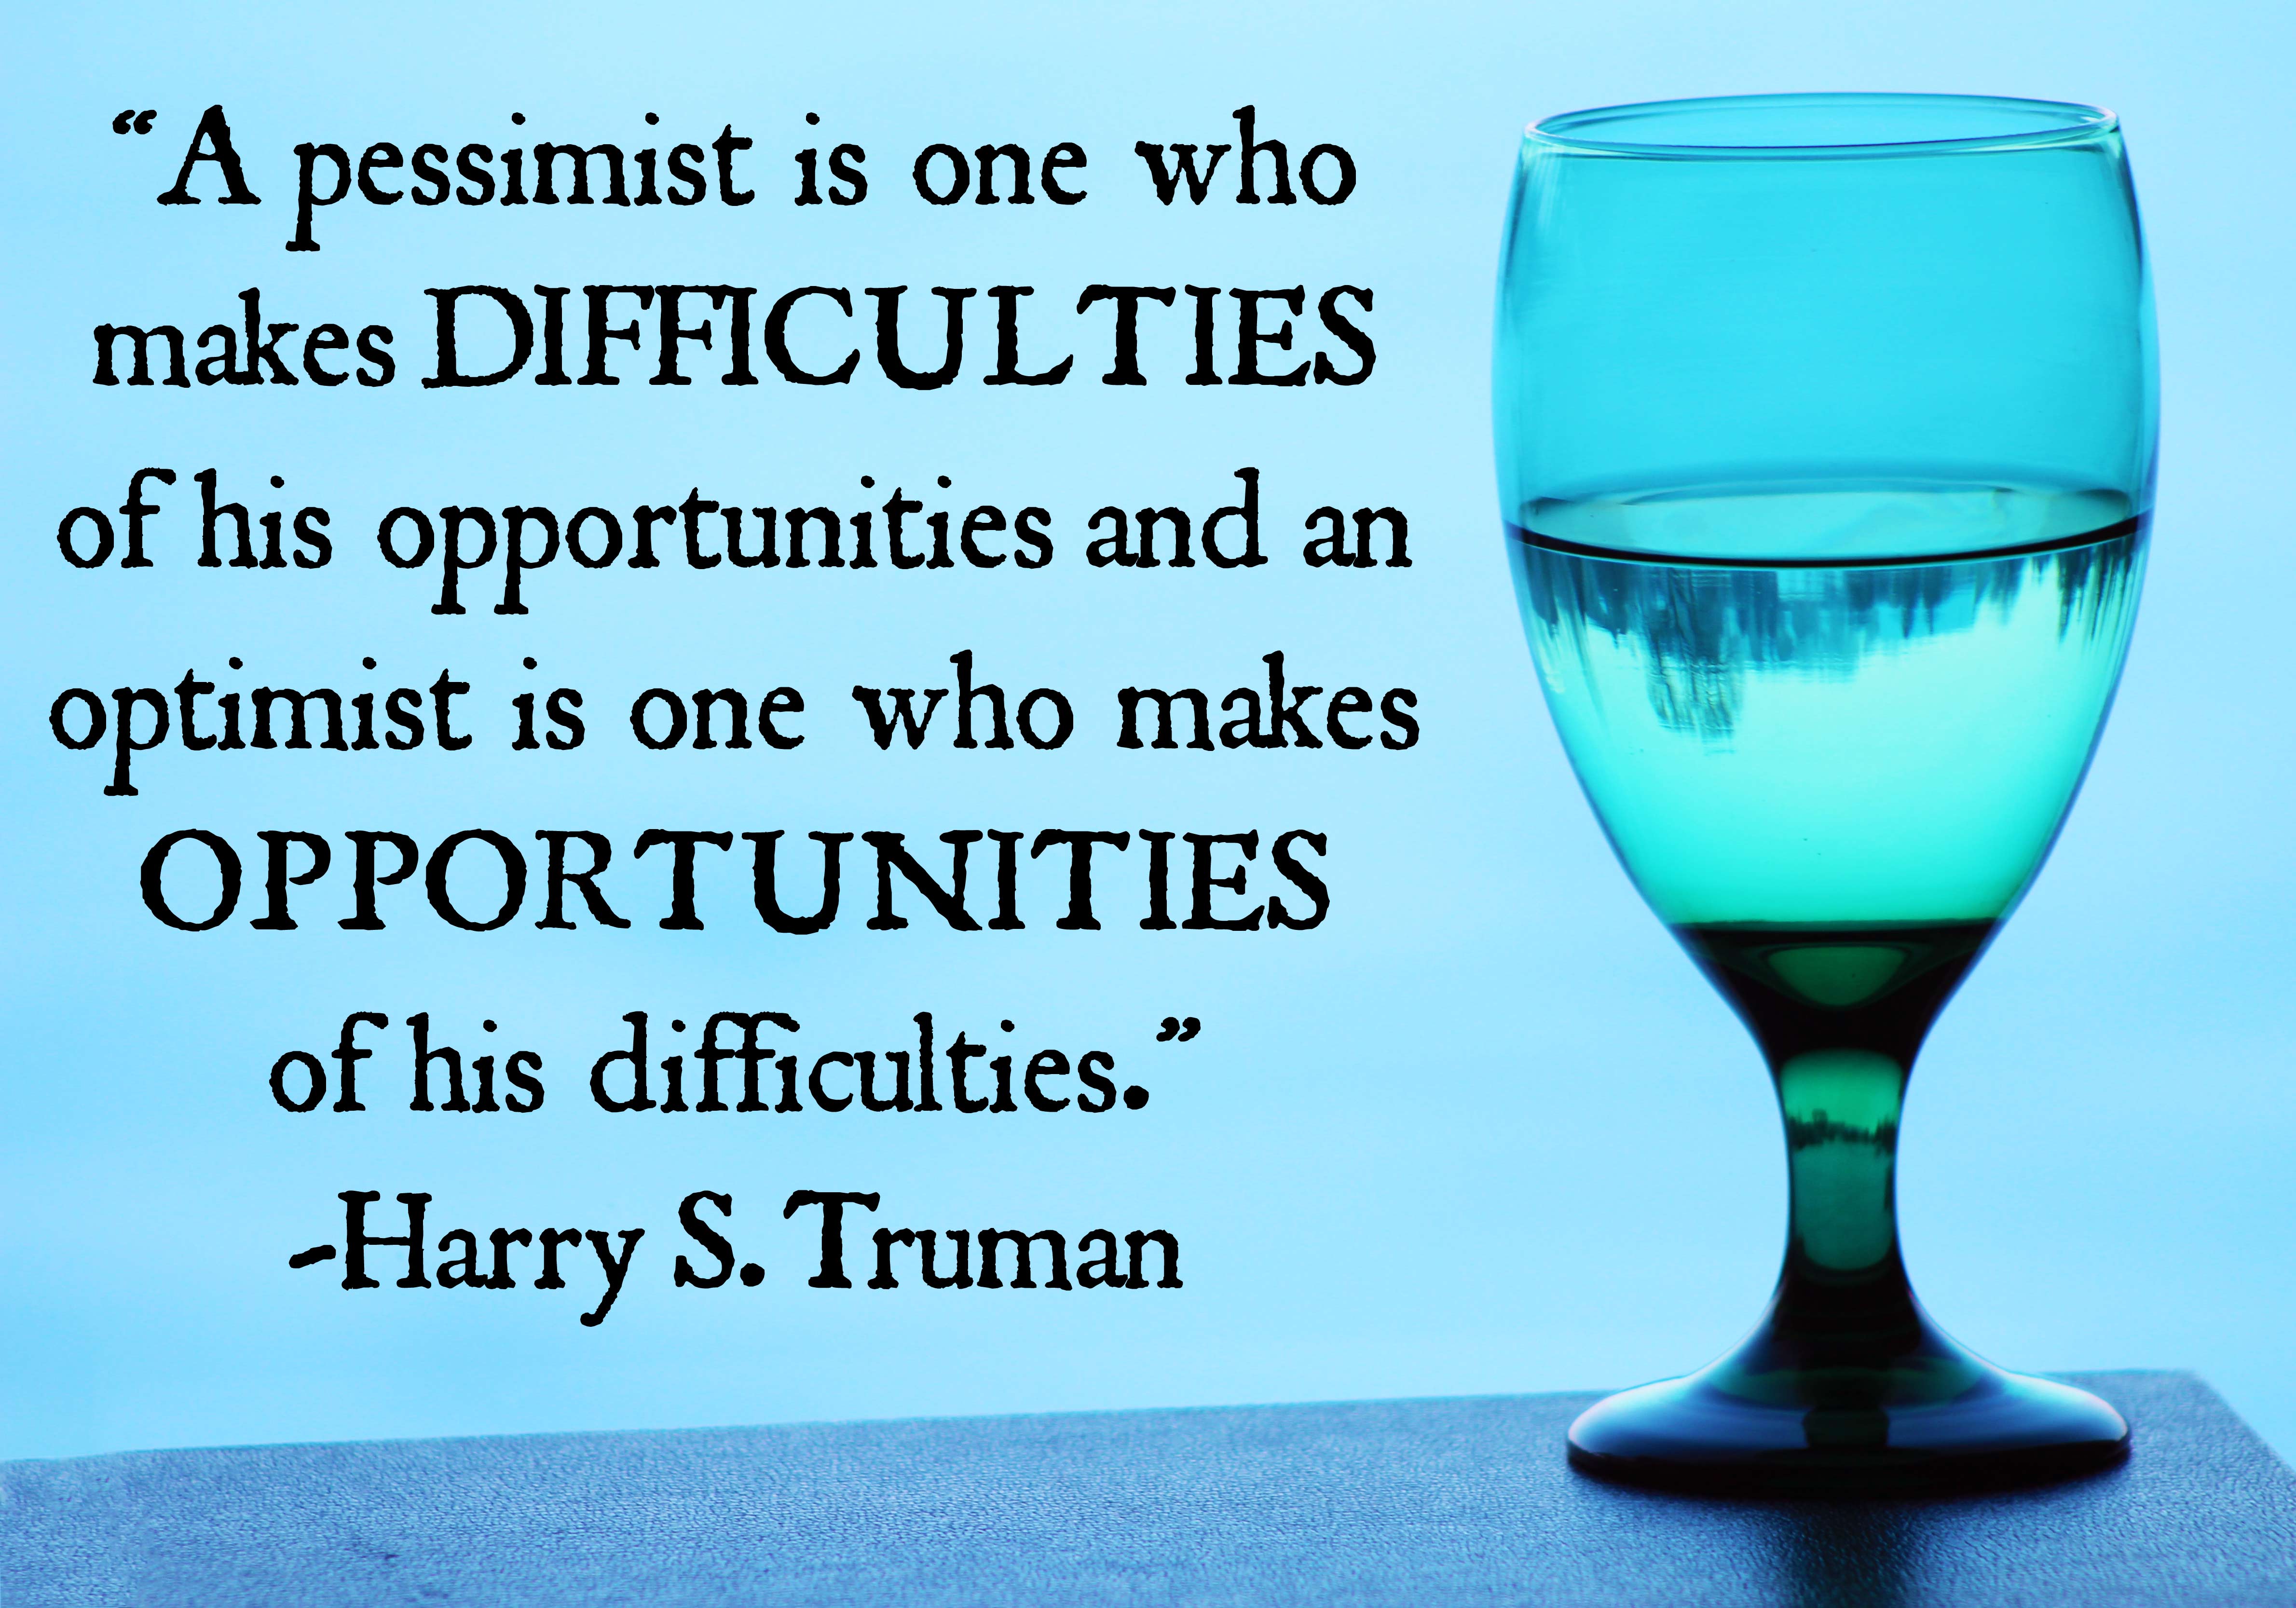 A pessimist is one who makes difficulties of his opportunities and an optimist is one who makes opportunities of his difficulties. Harry S Truman